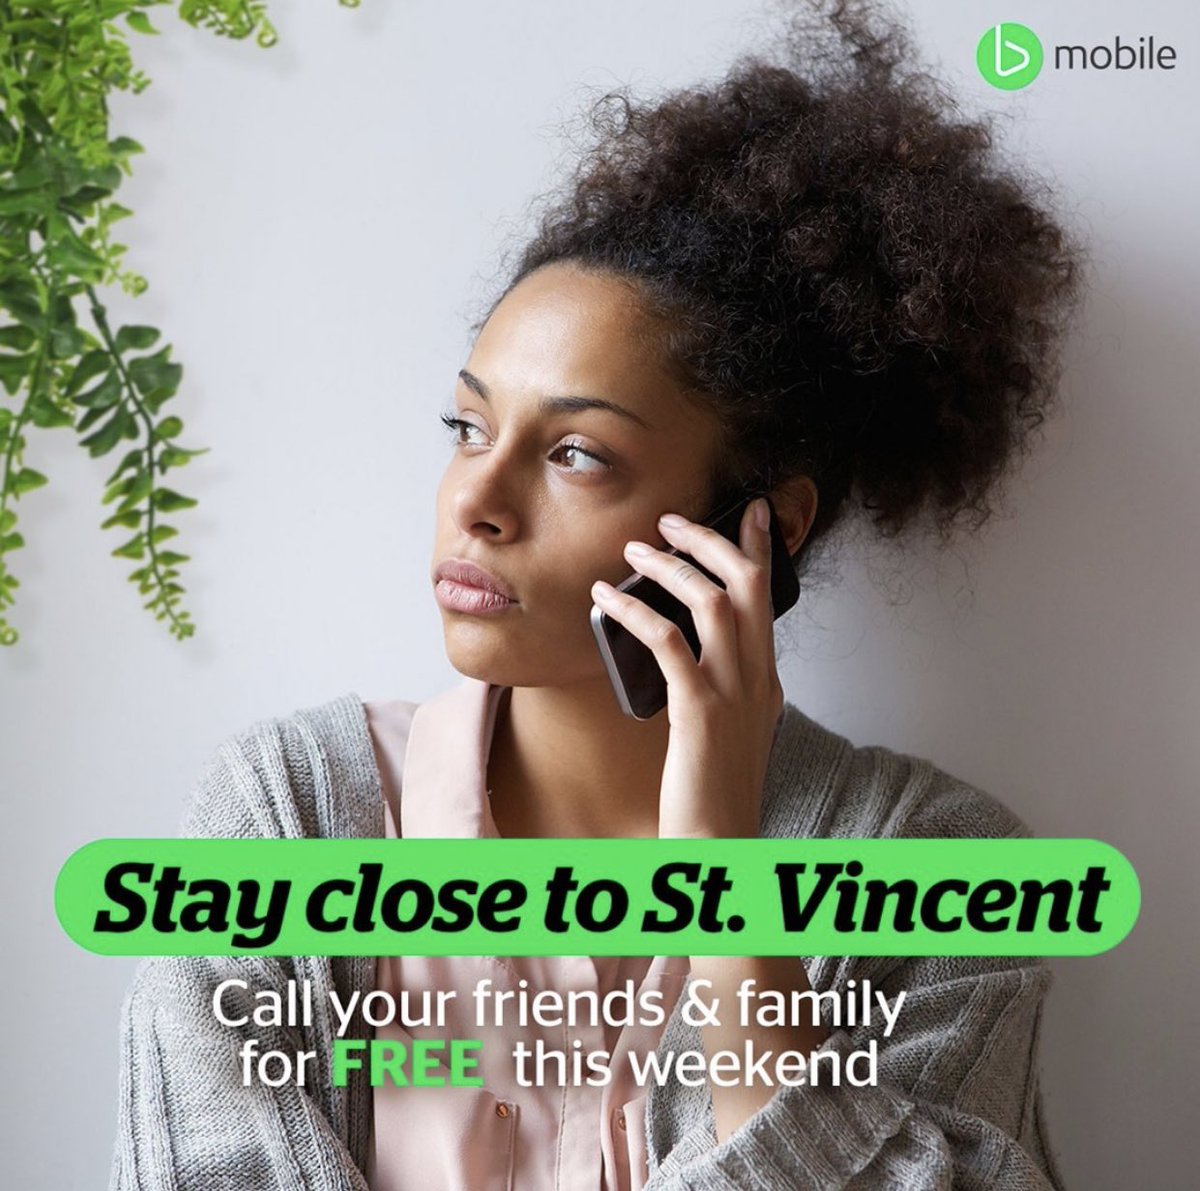 I really hope that  @bmobiletweet considers extending this promotion. With a nationwide power outage reported by  @NEMOSVG today, those in SVG will need all the support that they can get - & that includes the ability to stay in touch without interruption.  #LaSoufriereEruption